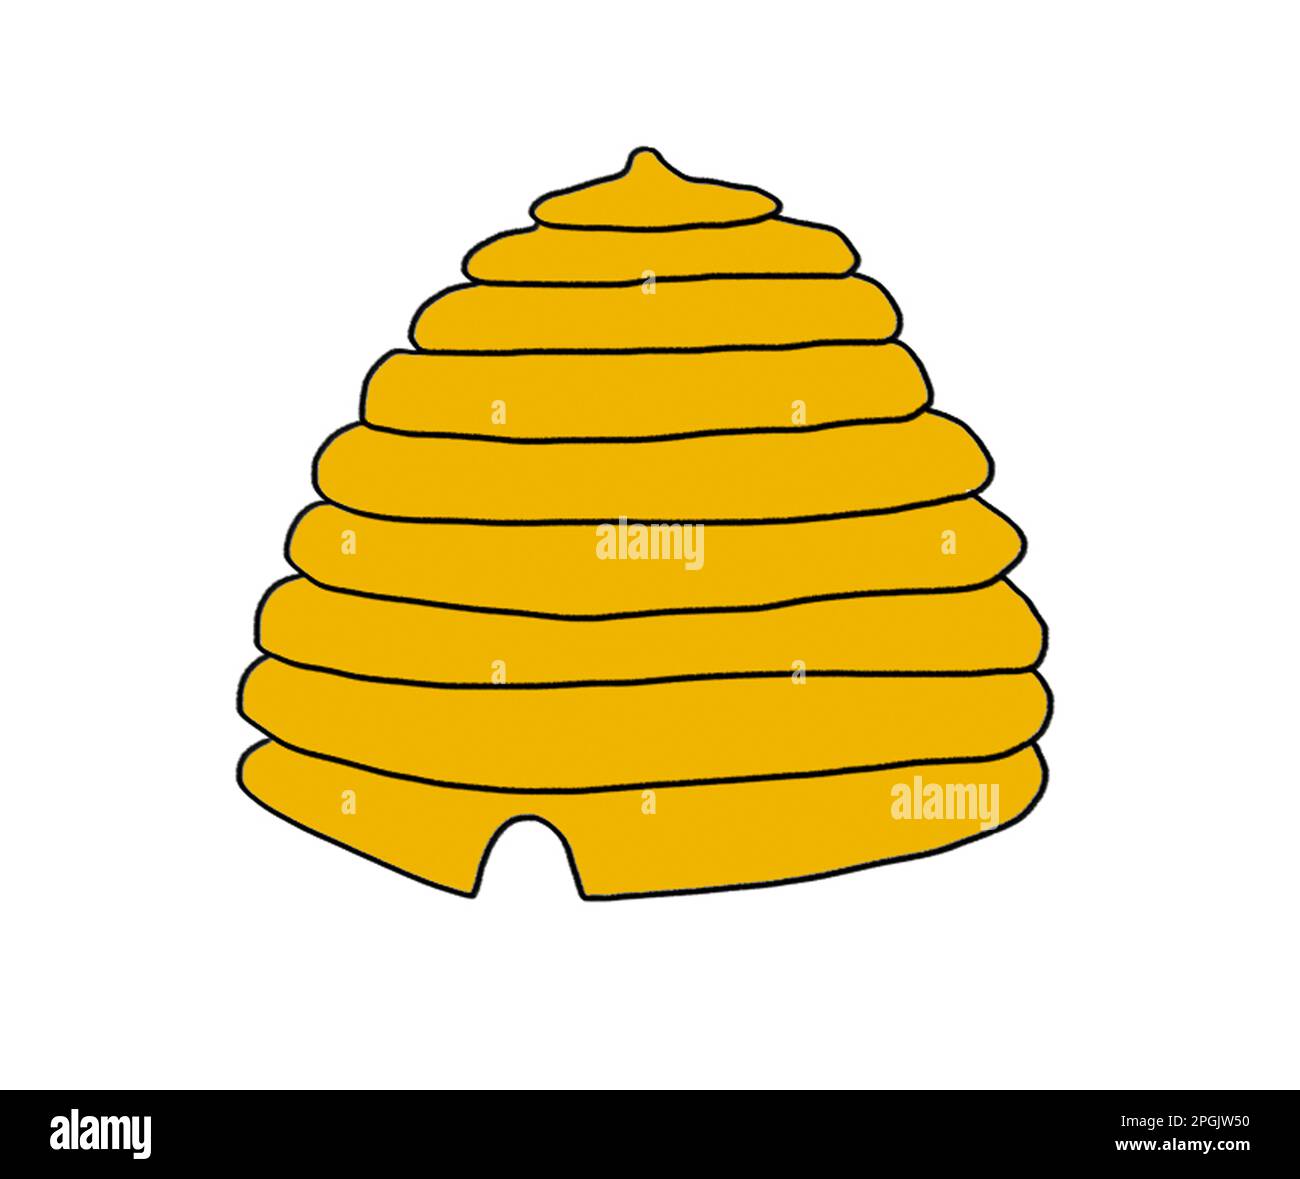 Illustration of a beehive Stock Photo